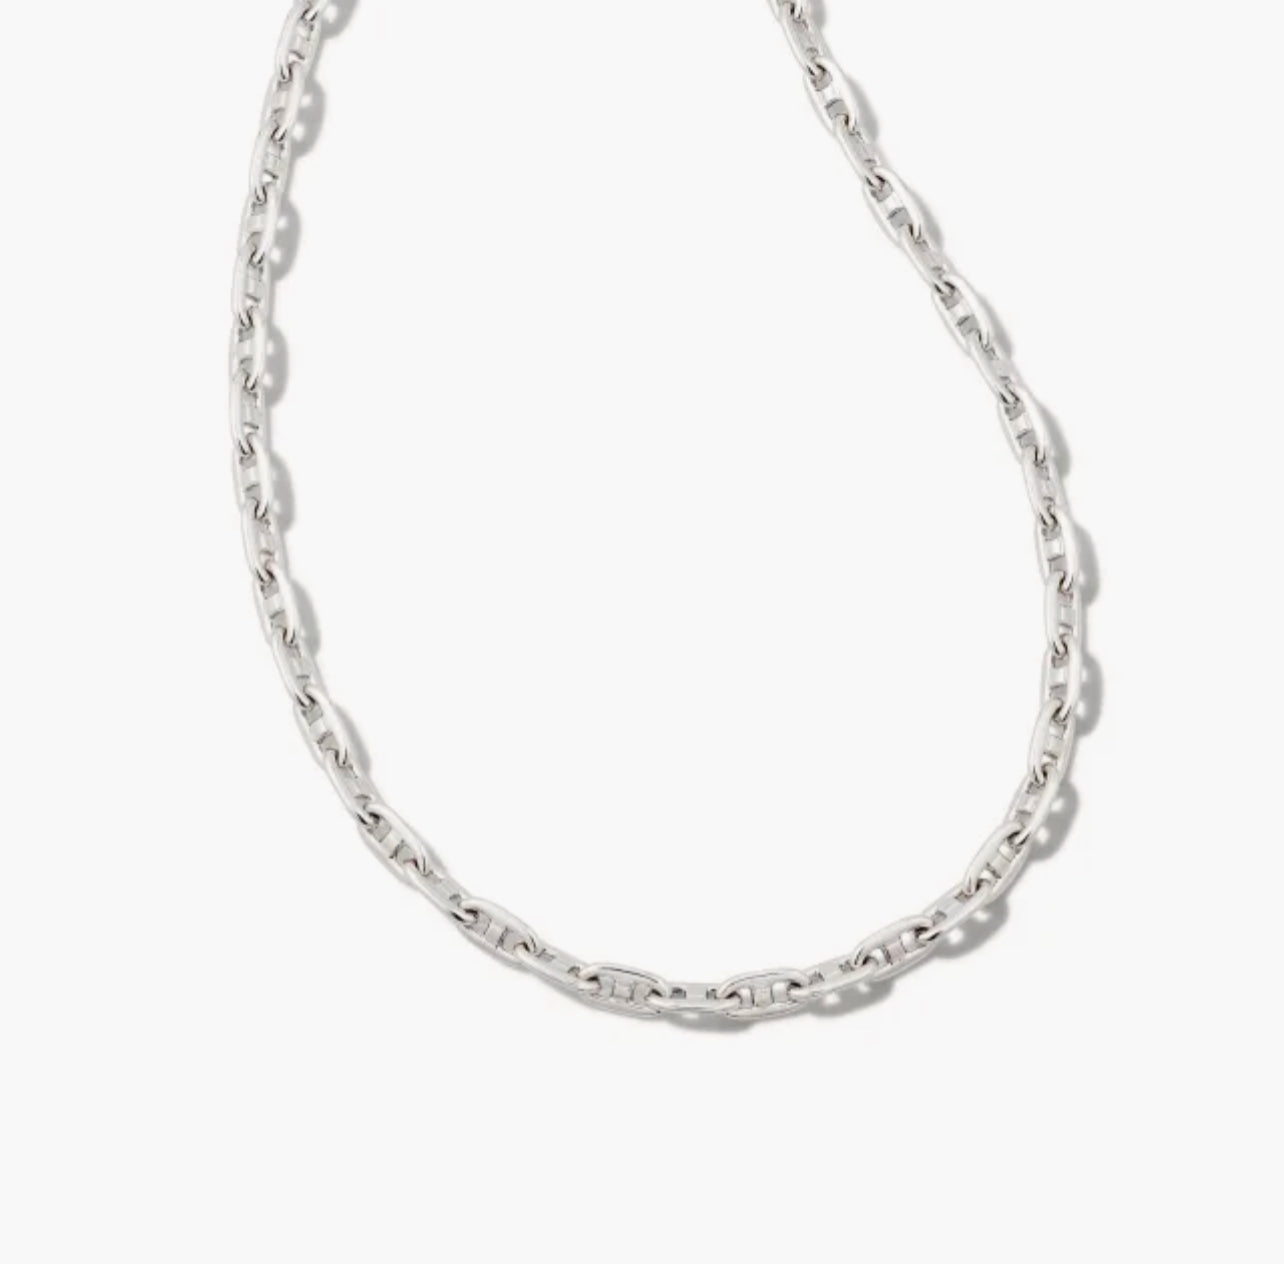 Kendra Scott-Bailey Chain Necklace in Silver 9608802180